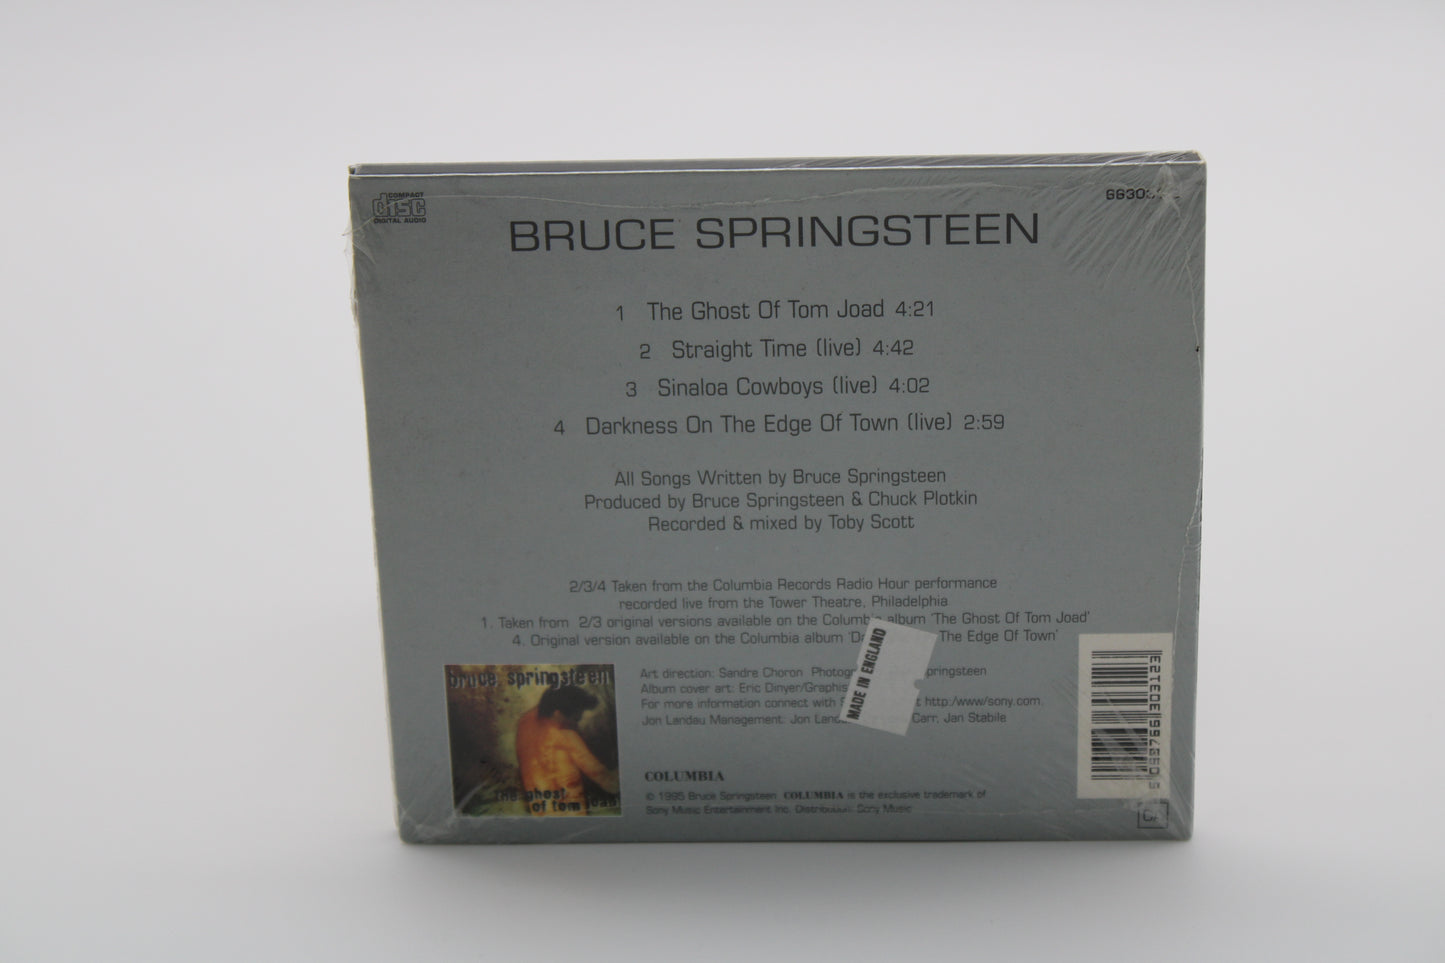 Bruce Springsteen CD/Digipak - Sealed - The Ghost of Tom Joad with Live Tracks